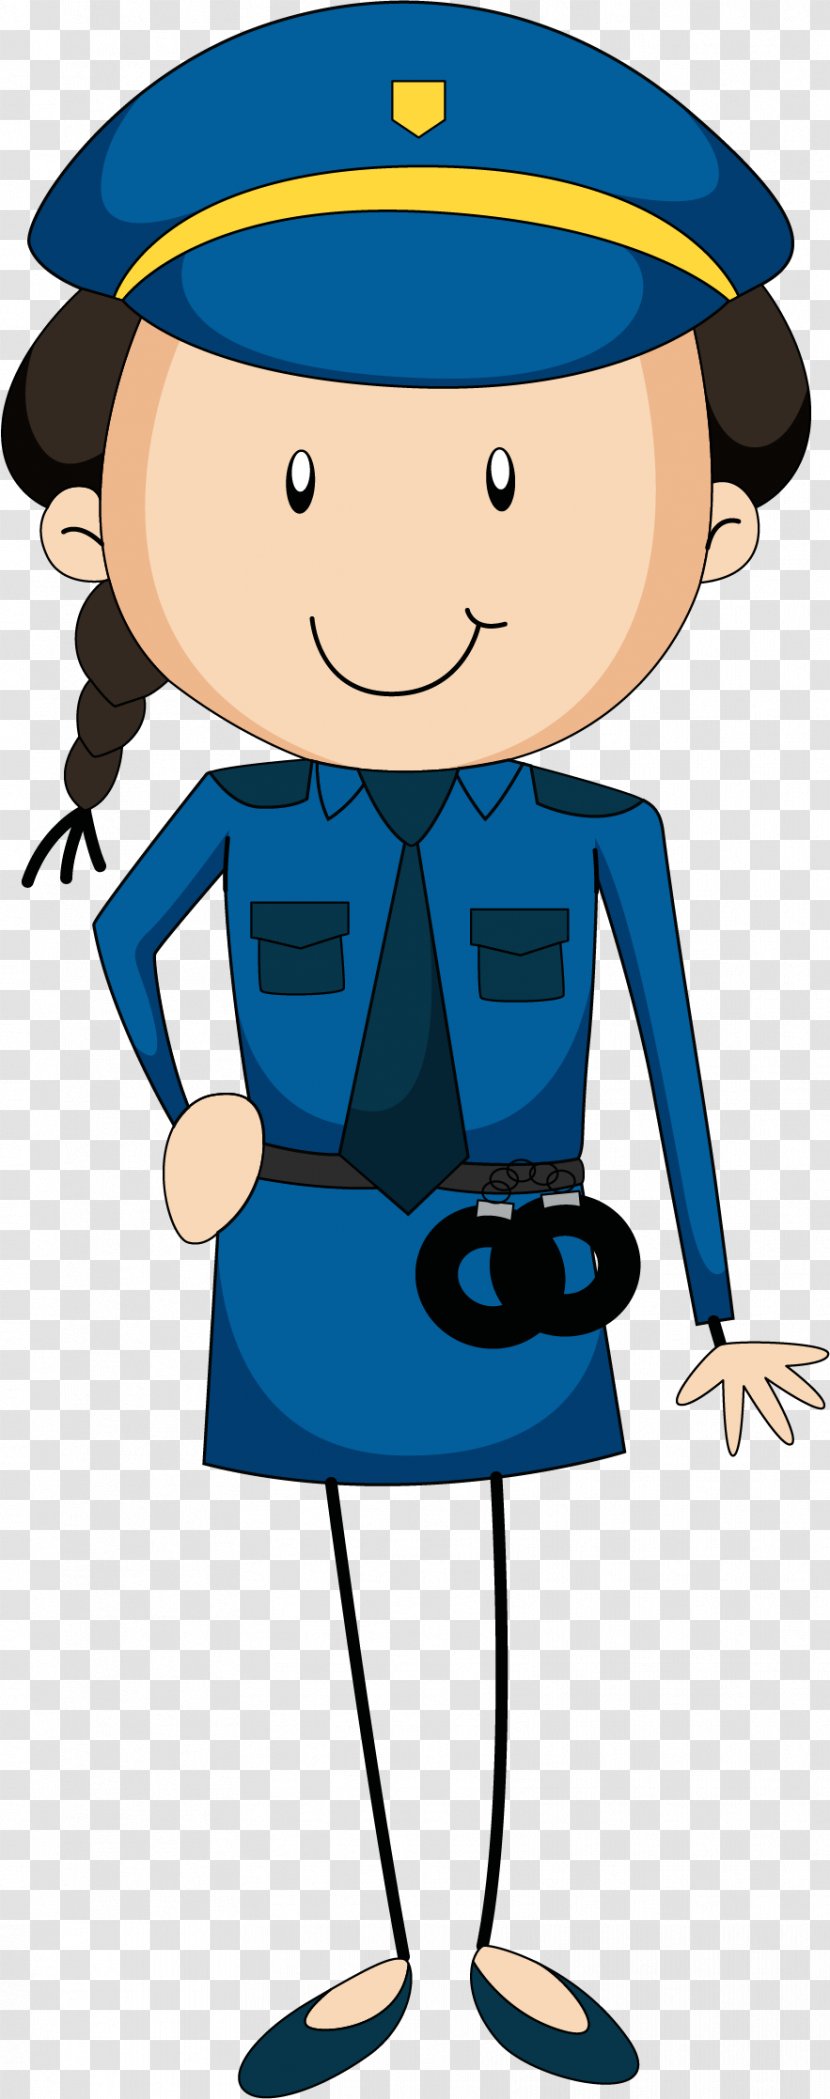 Royalty-free Stock Illustration - Vision Care - Cartoon Policewoman Transparent PNG